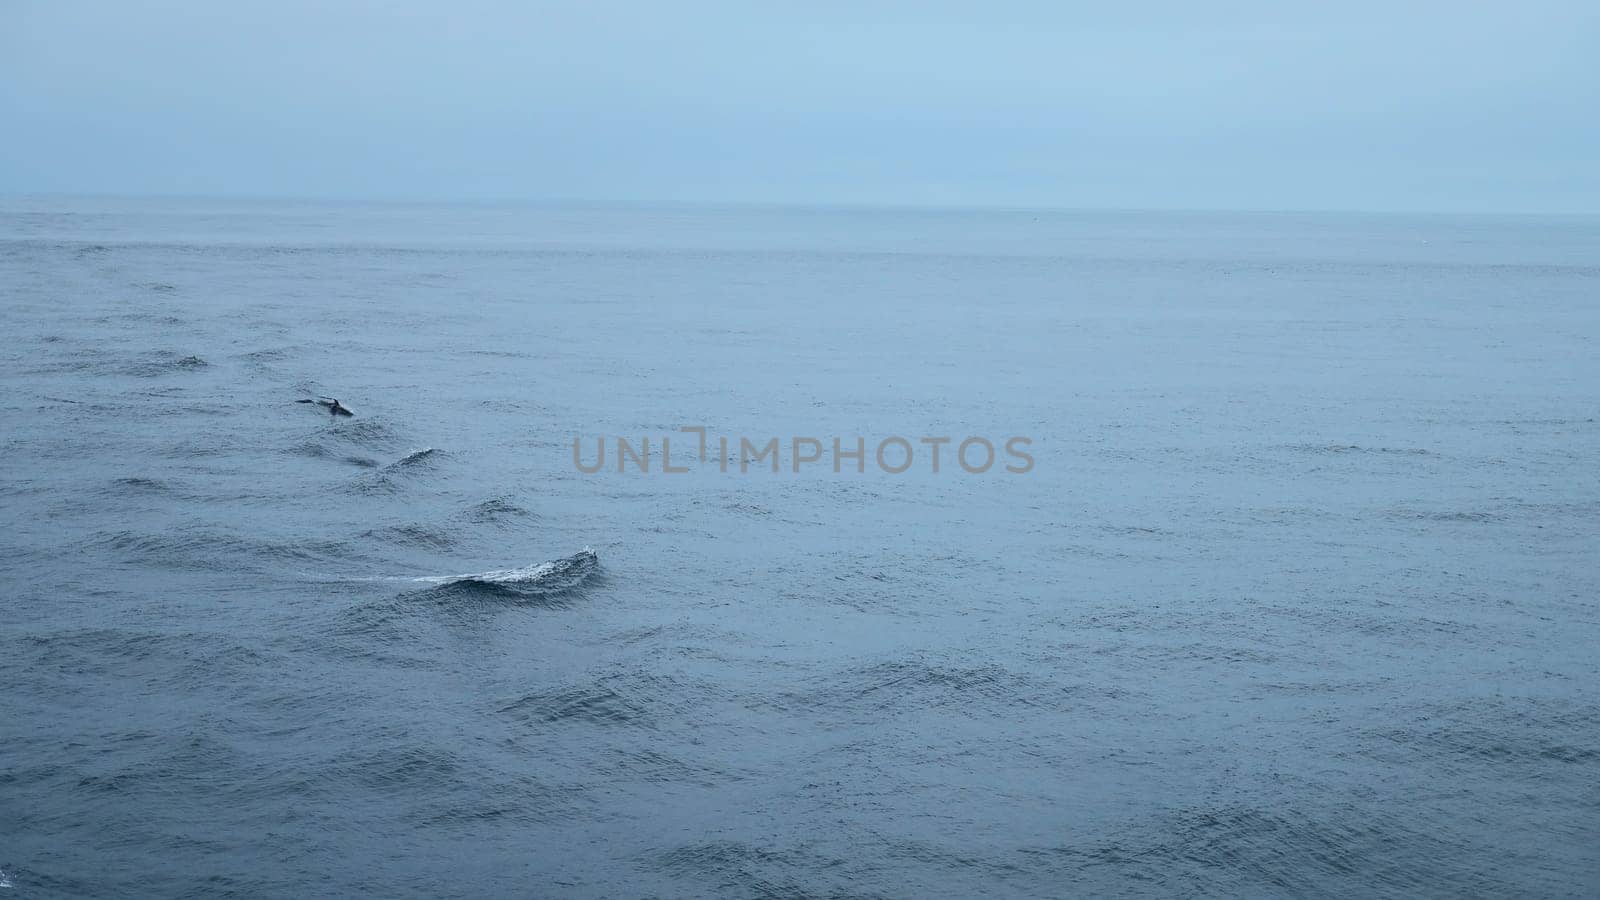 Beautiful sea surface with dolphin fins. Clip. Surface of open ocean with swimming dolphins in cloudy weather. Fins of swimming dolphins above surface of blue sea by Mediawhalestock